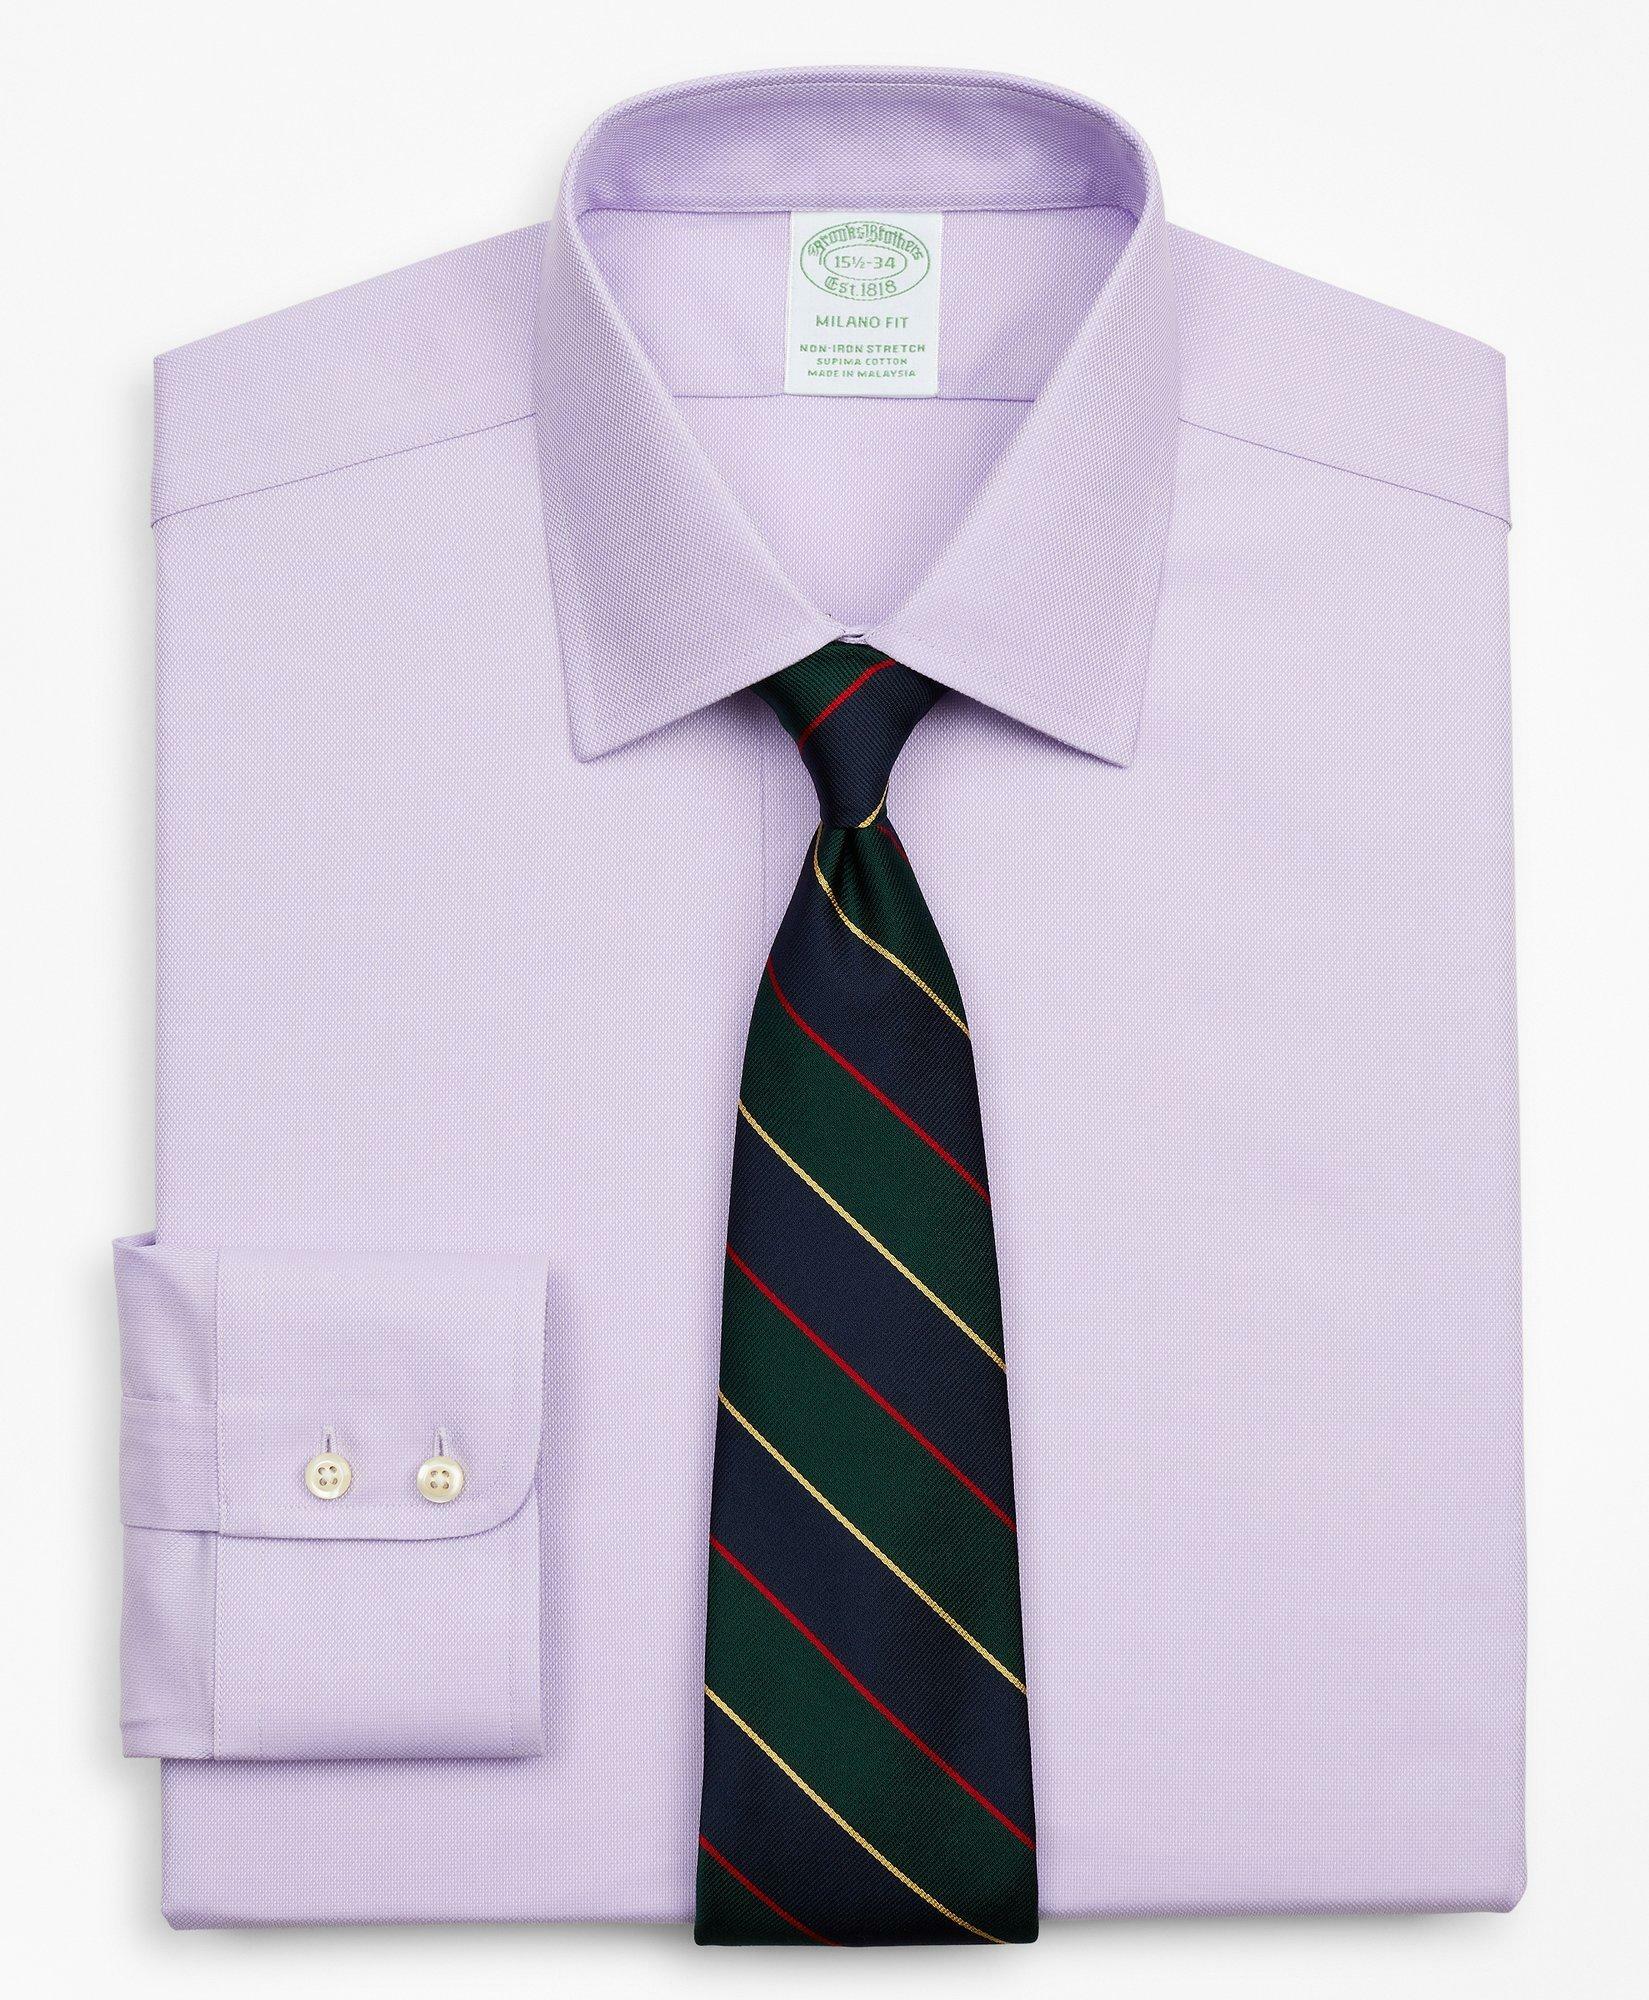 Brooks Brothers Men's Stretch Milano Slim-Fit Dress Shirt, Non-Iron Royal Oxford Ainsley Collar | Lavender